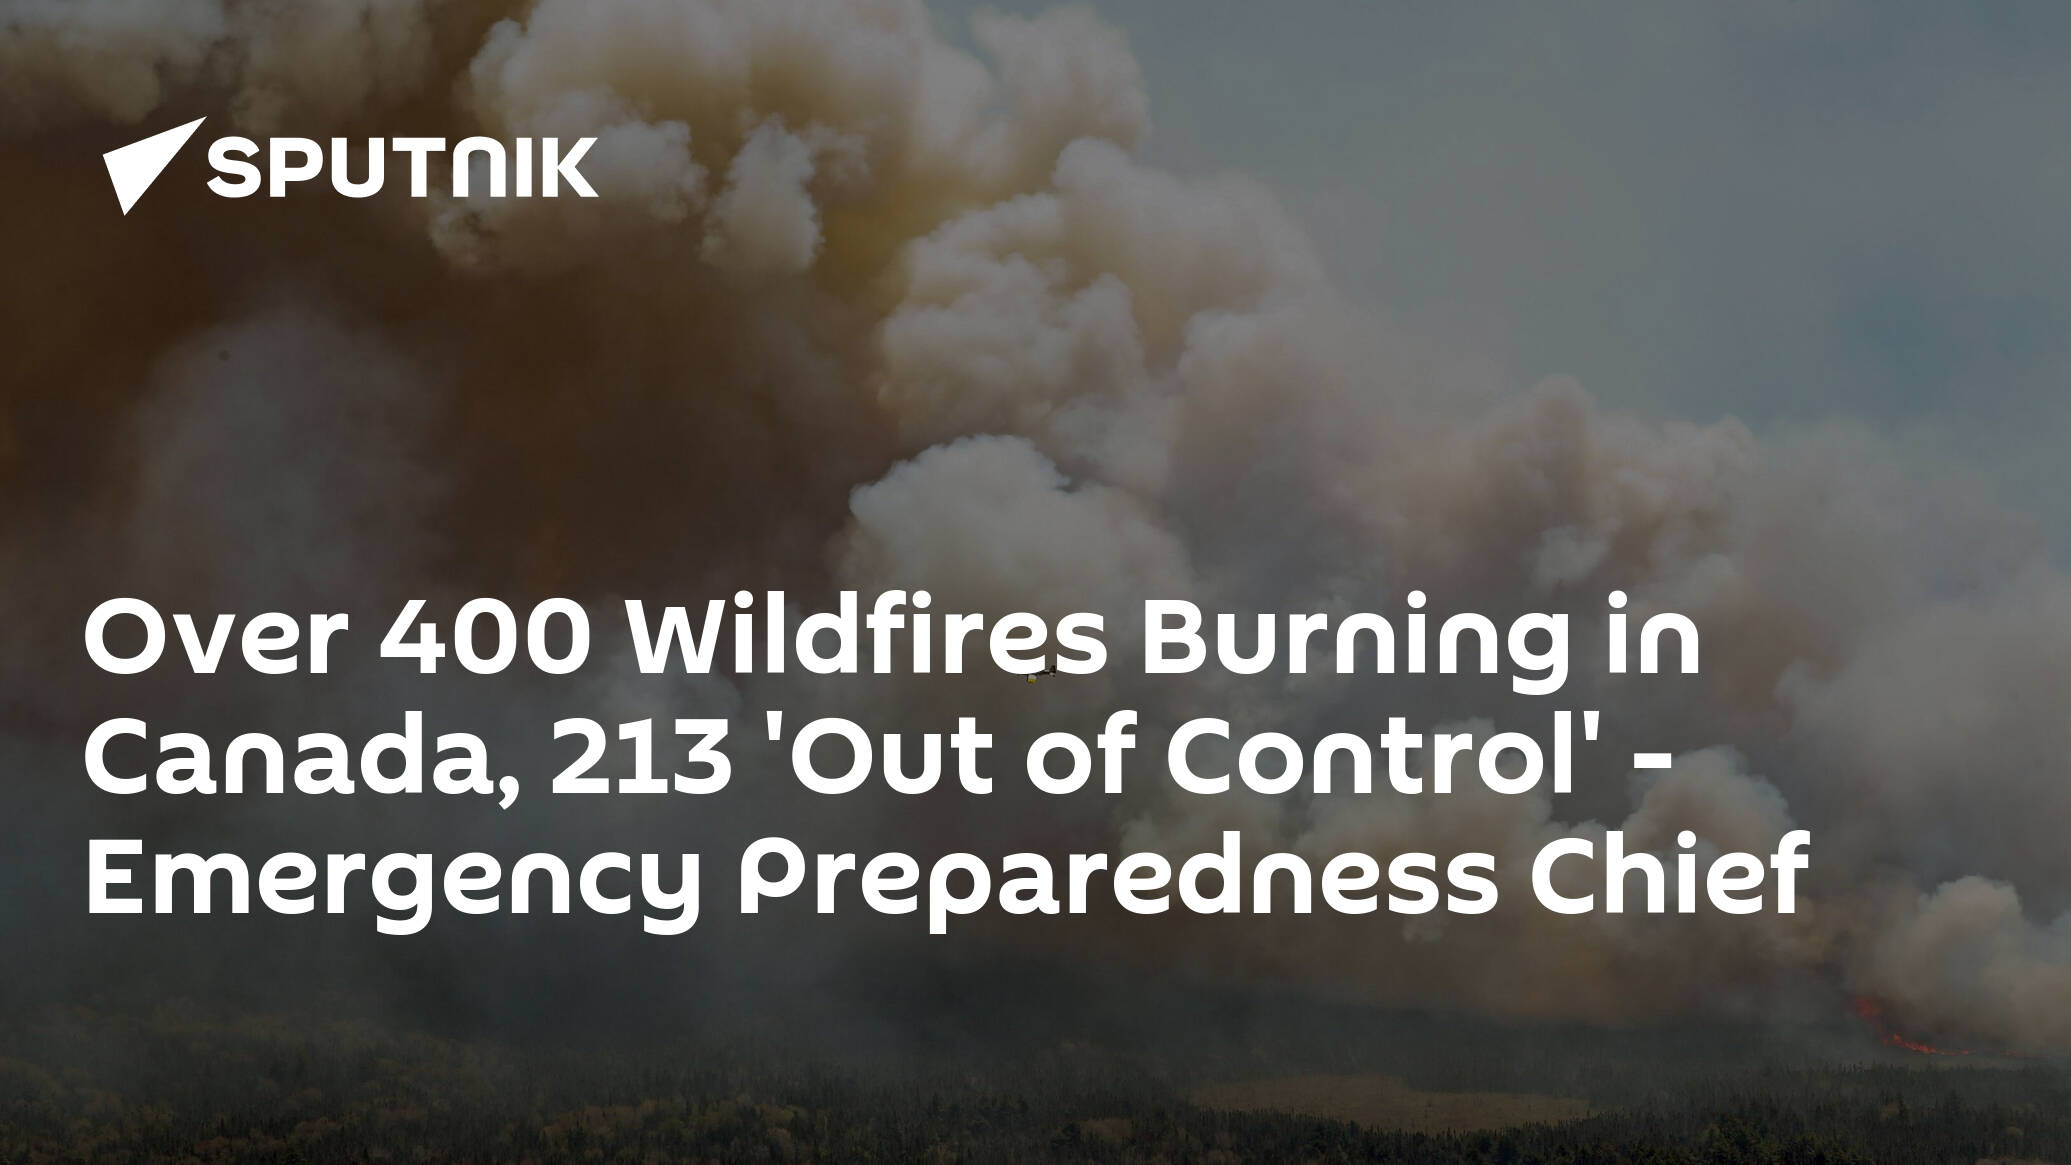 Over 400 Wildfires Burning in Canada, 213 'Out of Control' – Emergency Preparedness Chief